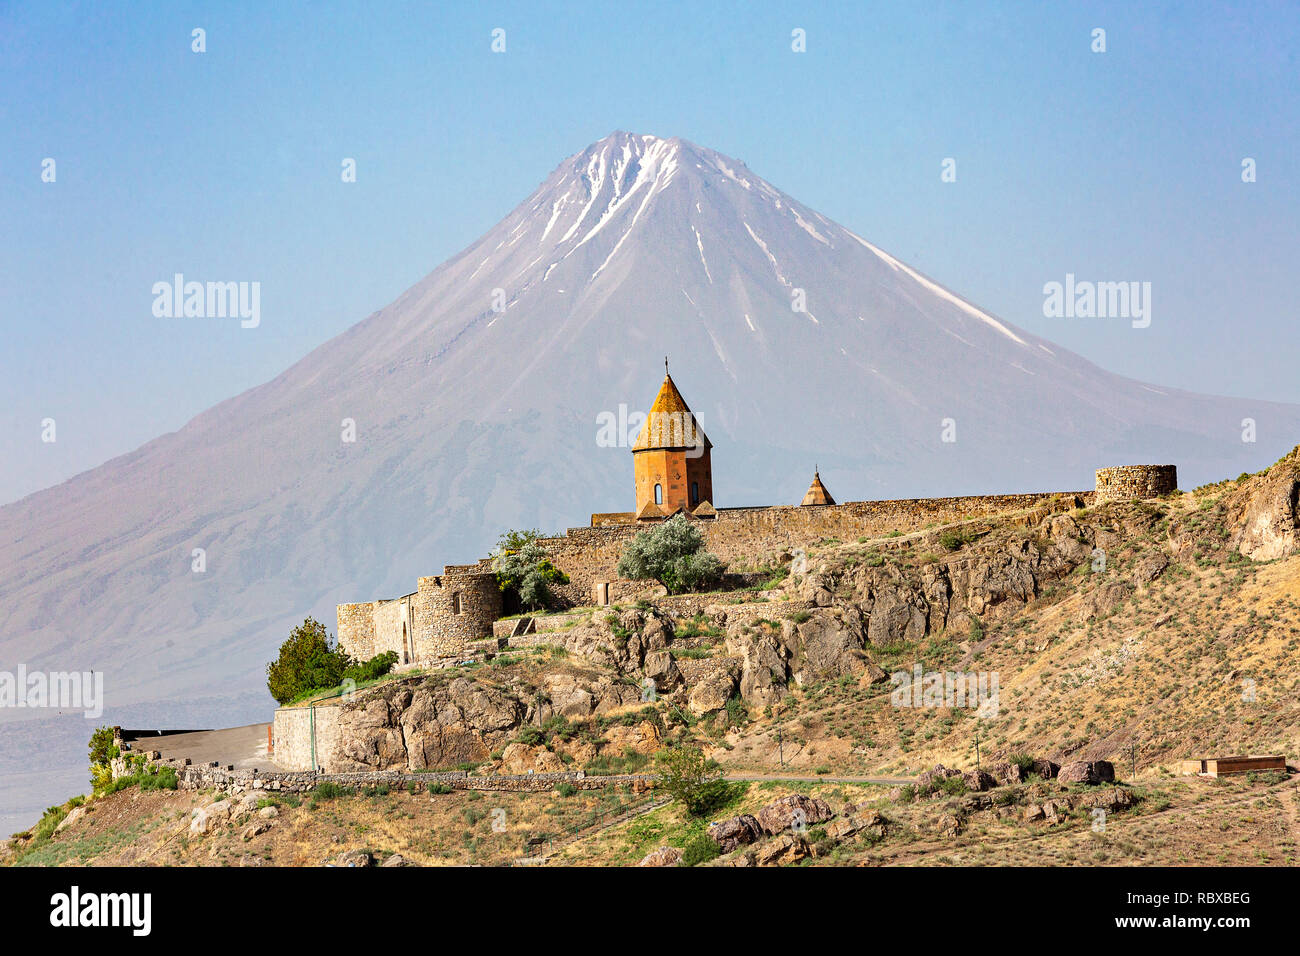 Khor Virap Monastery with Mt Ararat in the background in Armenia Stock Photo